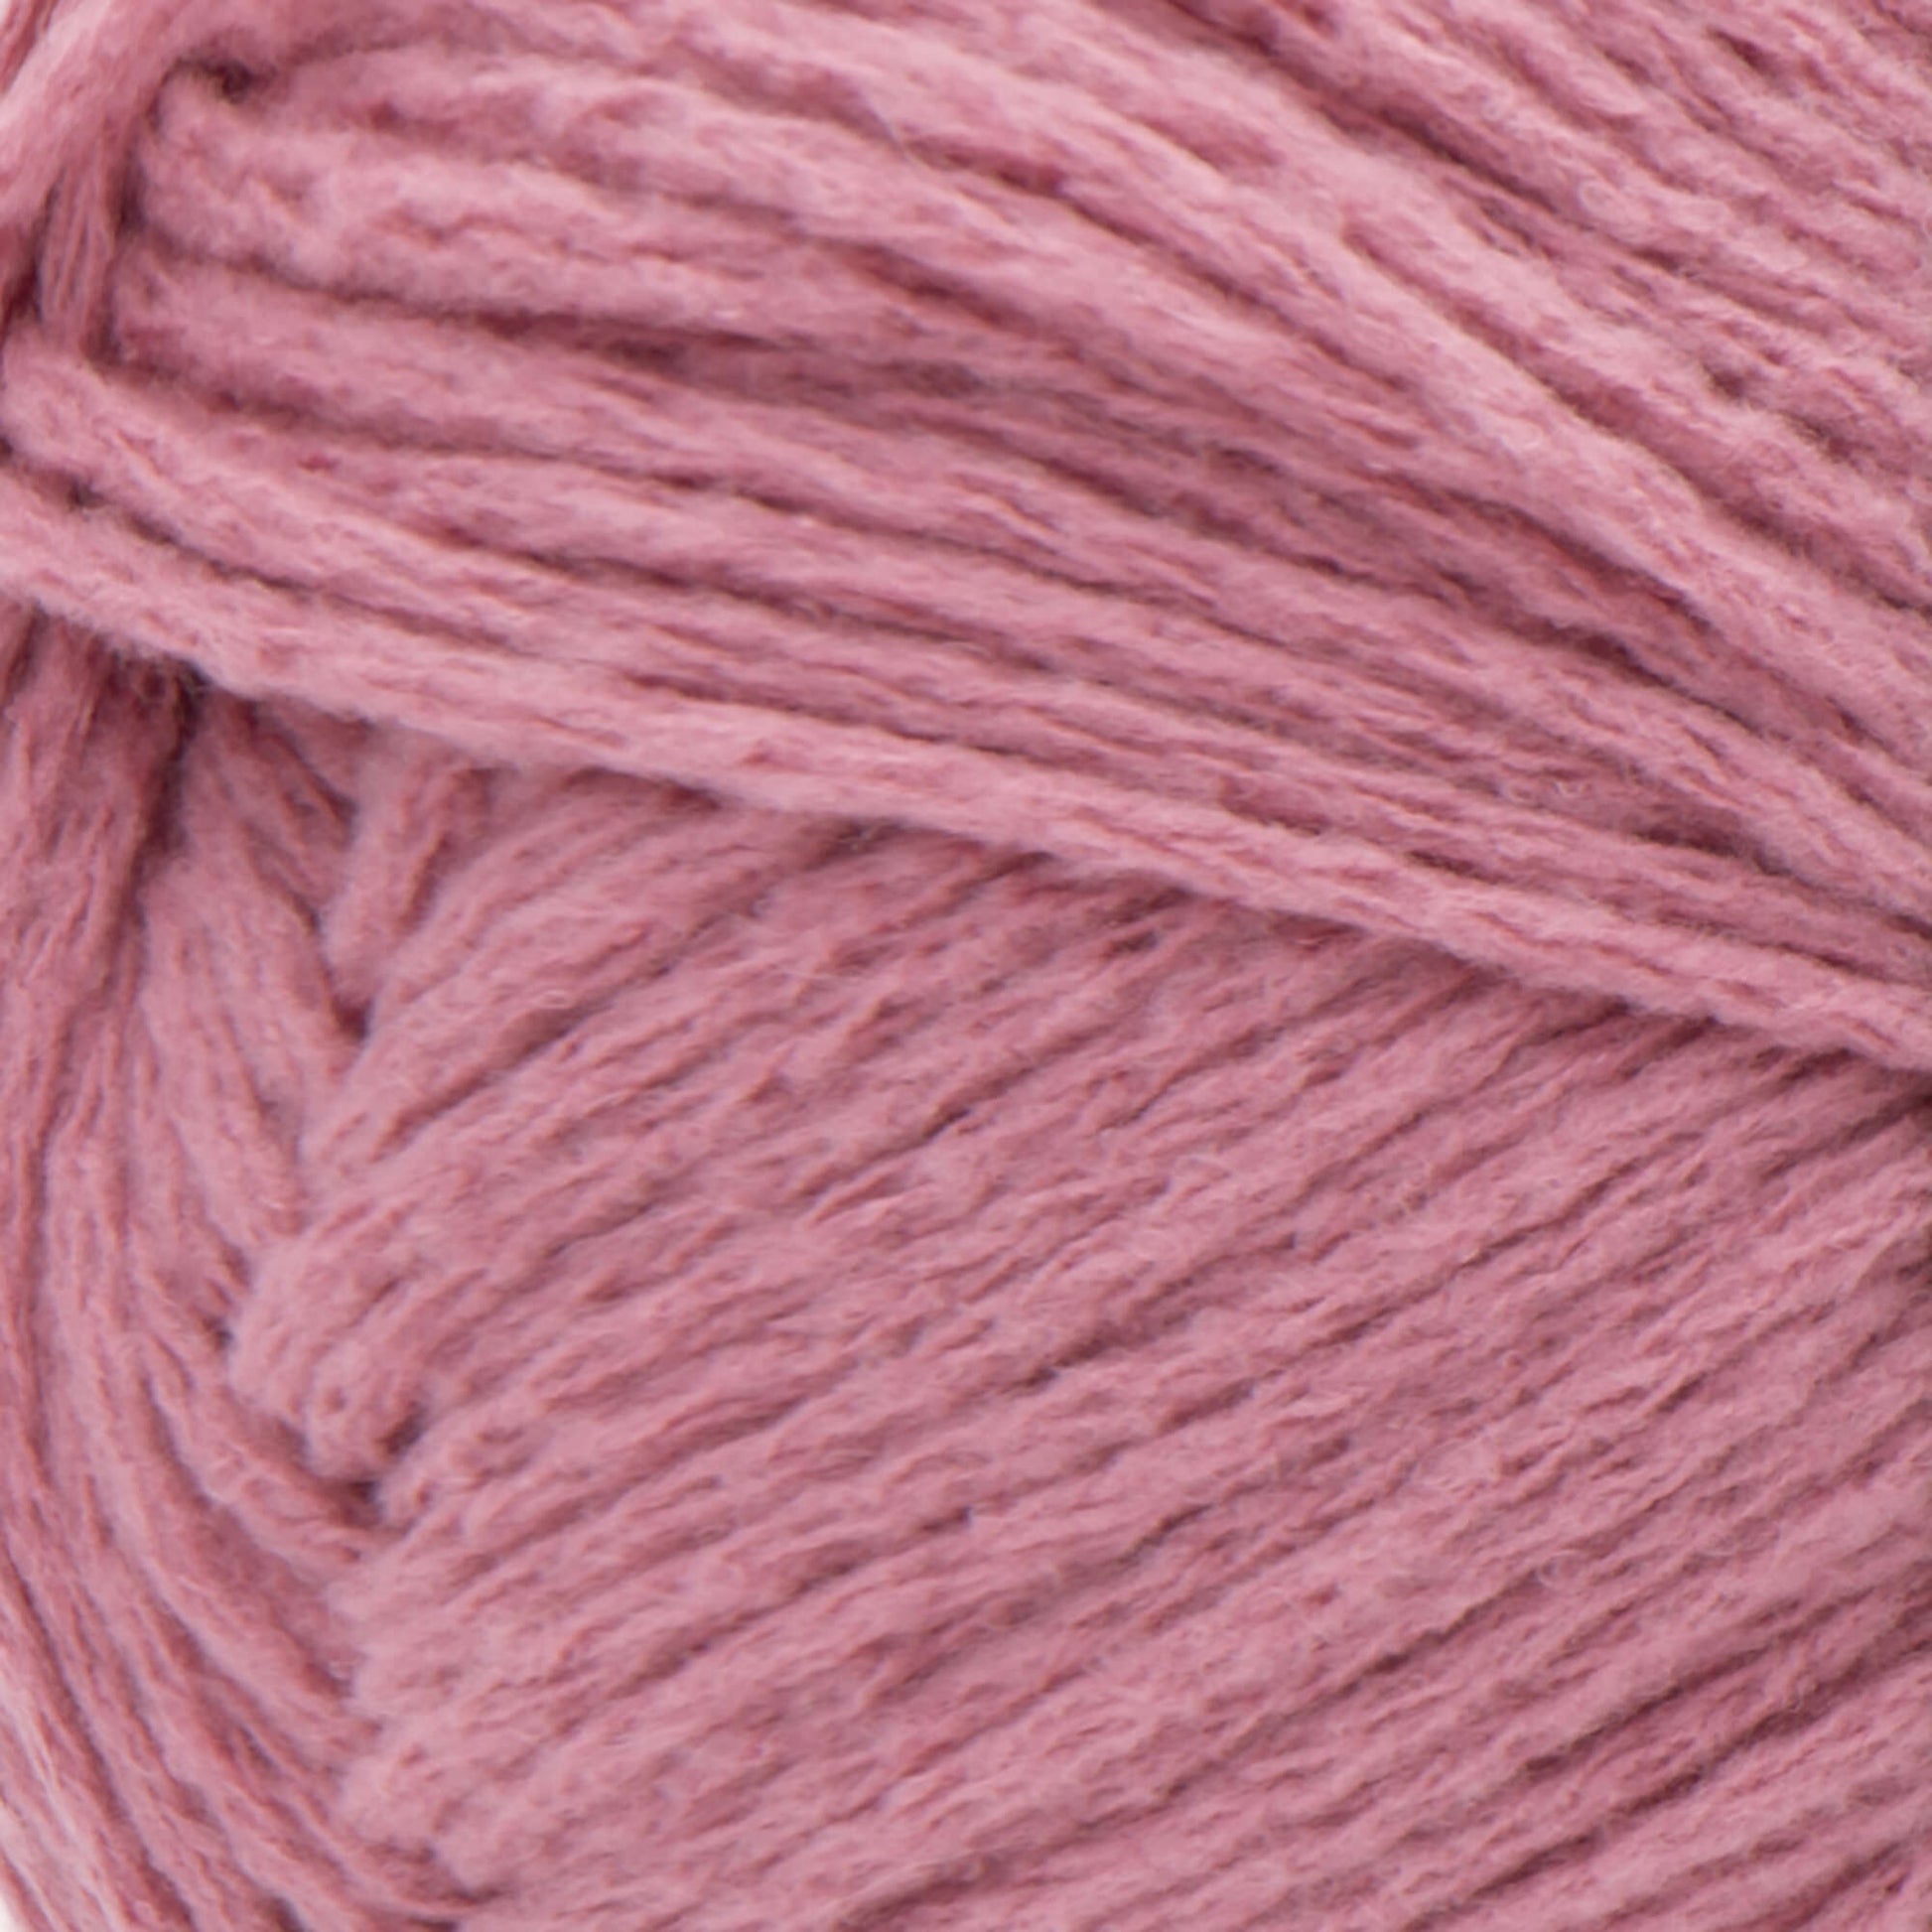 Red Heart Amore Yarn - Discontinued shades Blush